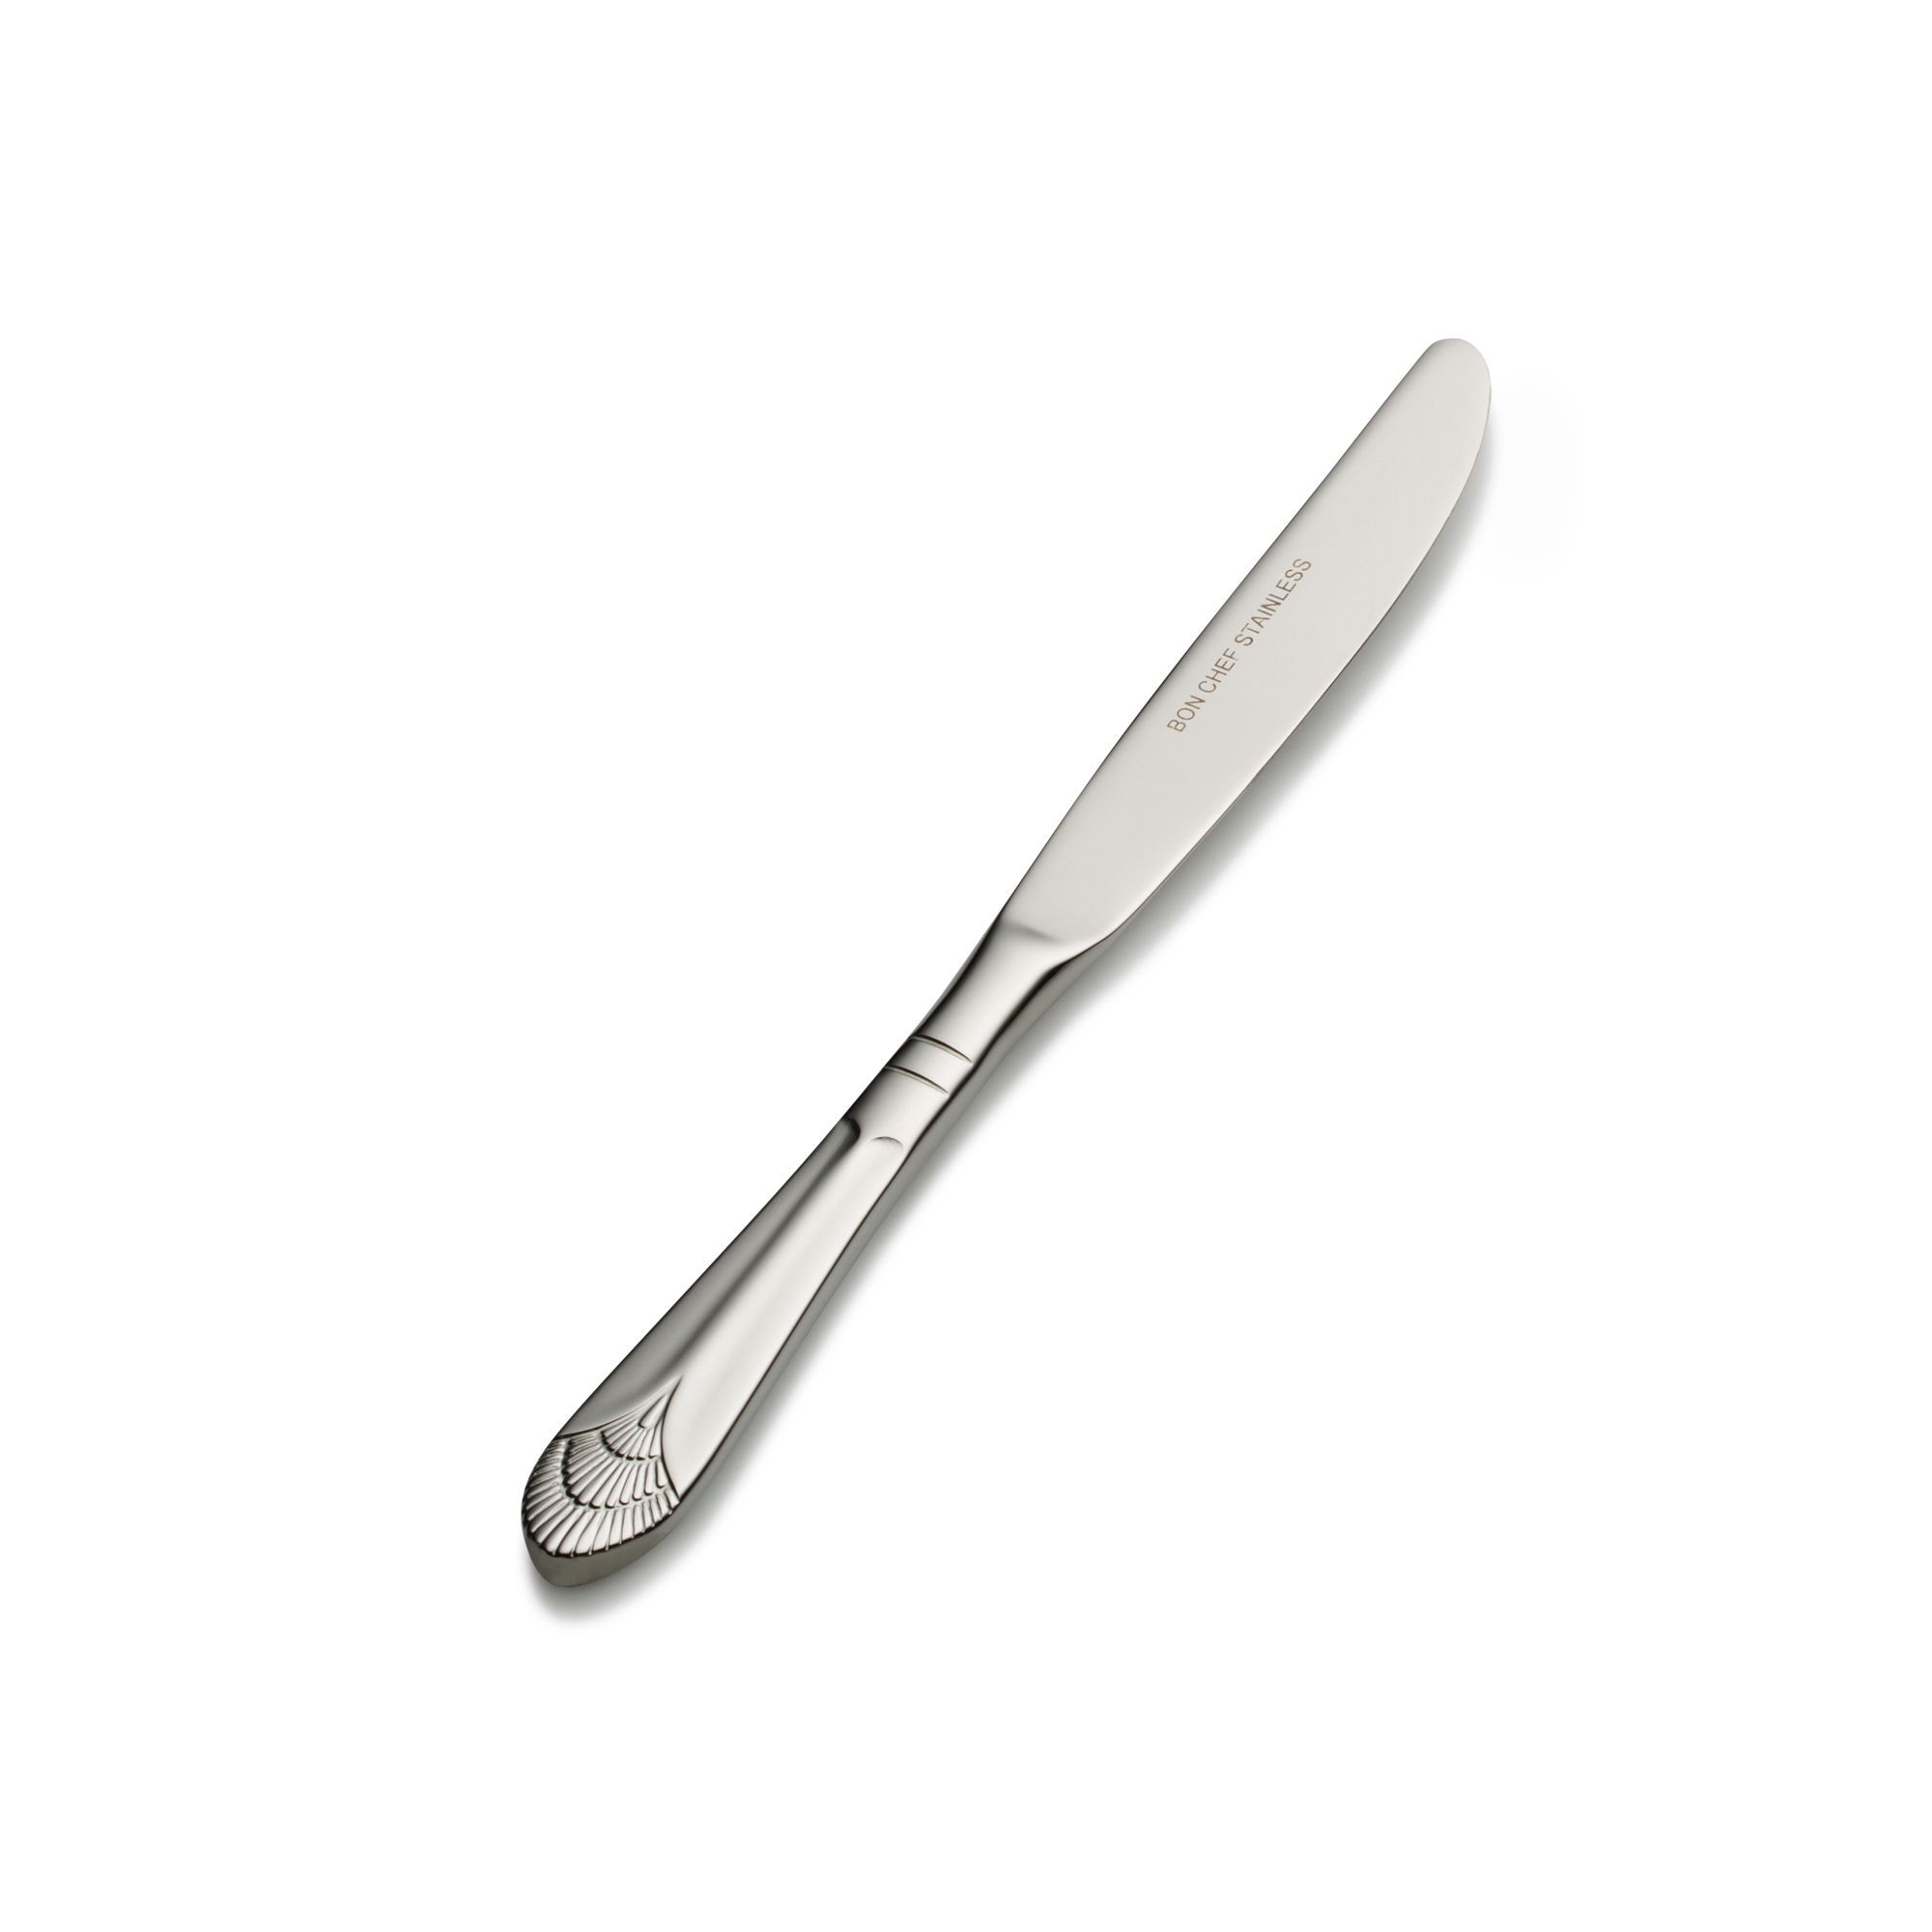 Bon Chef S1717 Nile 18/8 Stainless Steel European Solid Handle Butter Knife